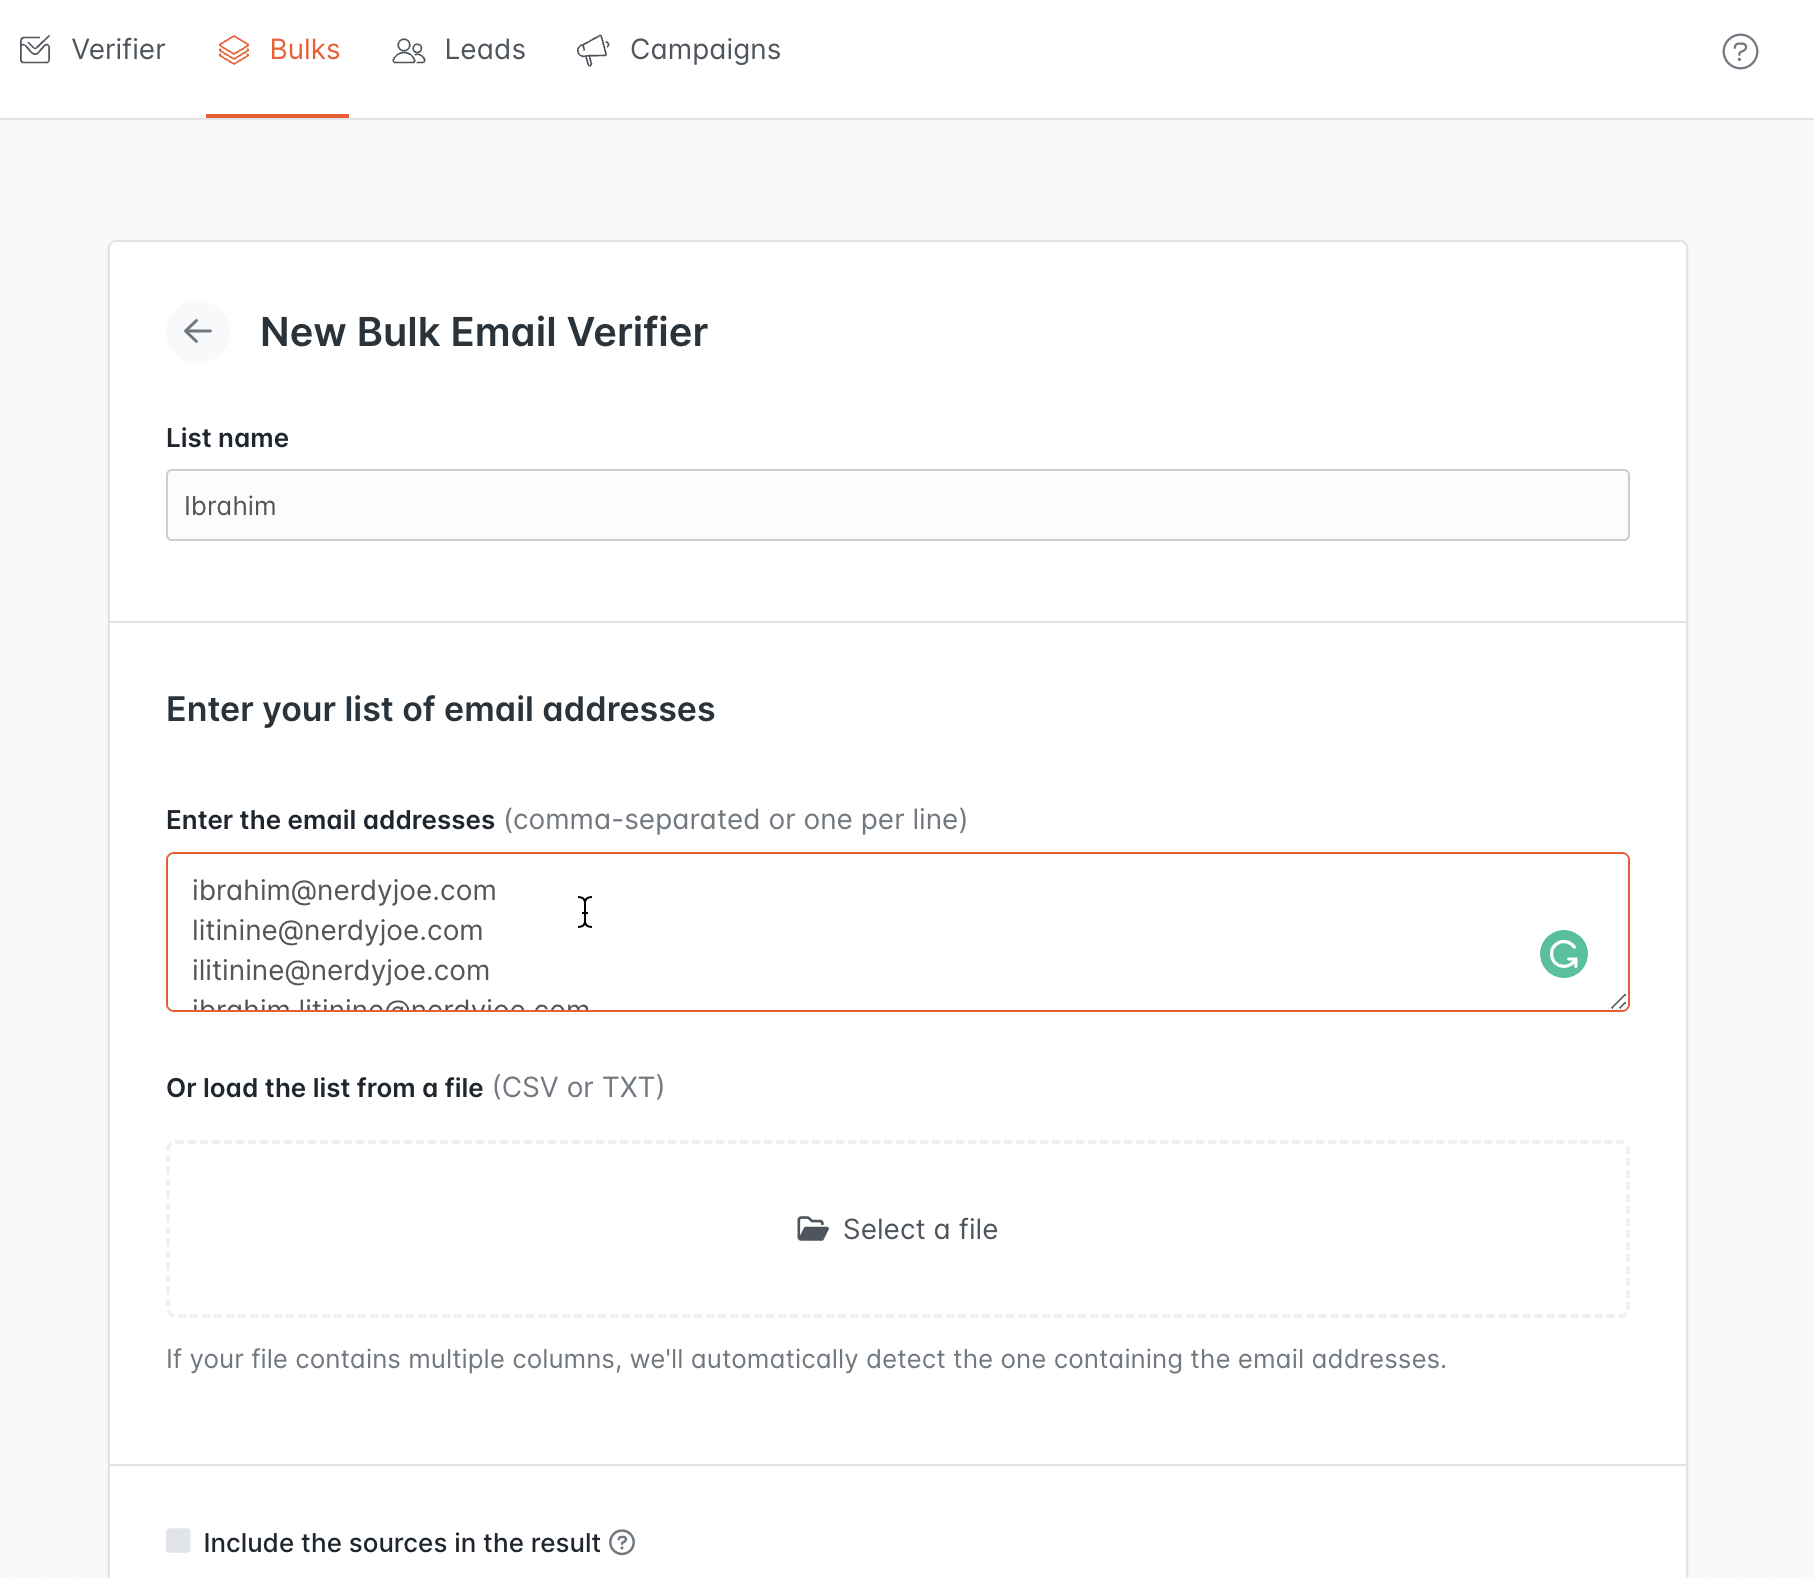 Verify your email addresses with hunter.io